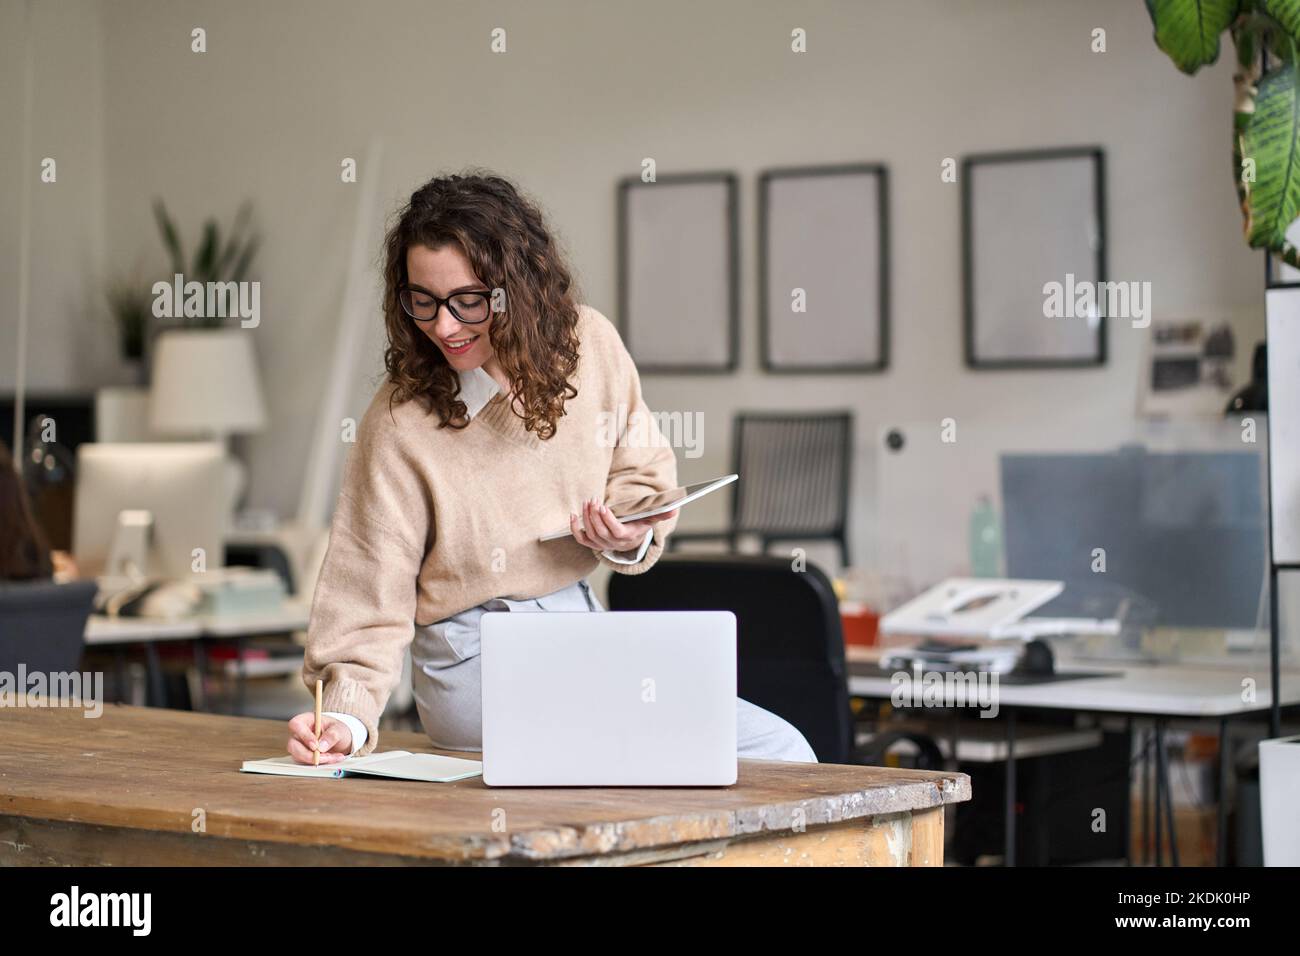 Young smiling busy business woman working in office using digital tablet. Stock Photo